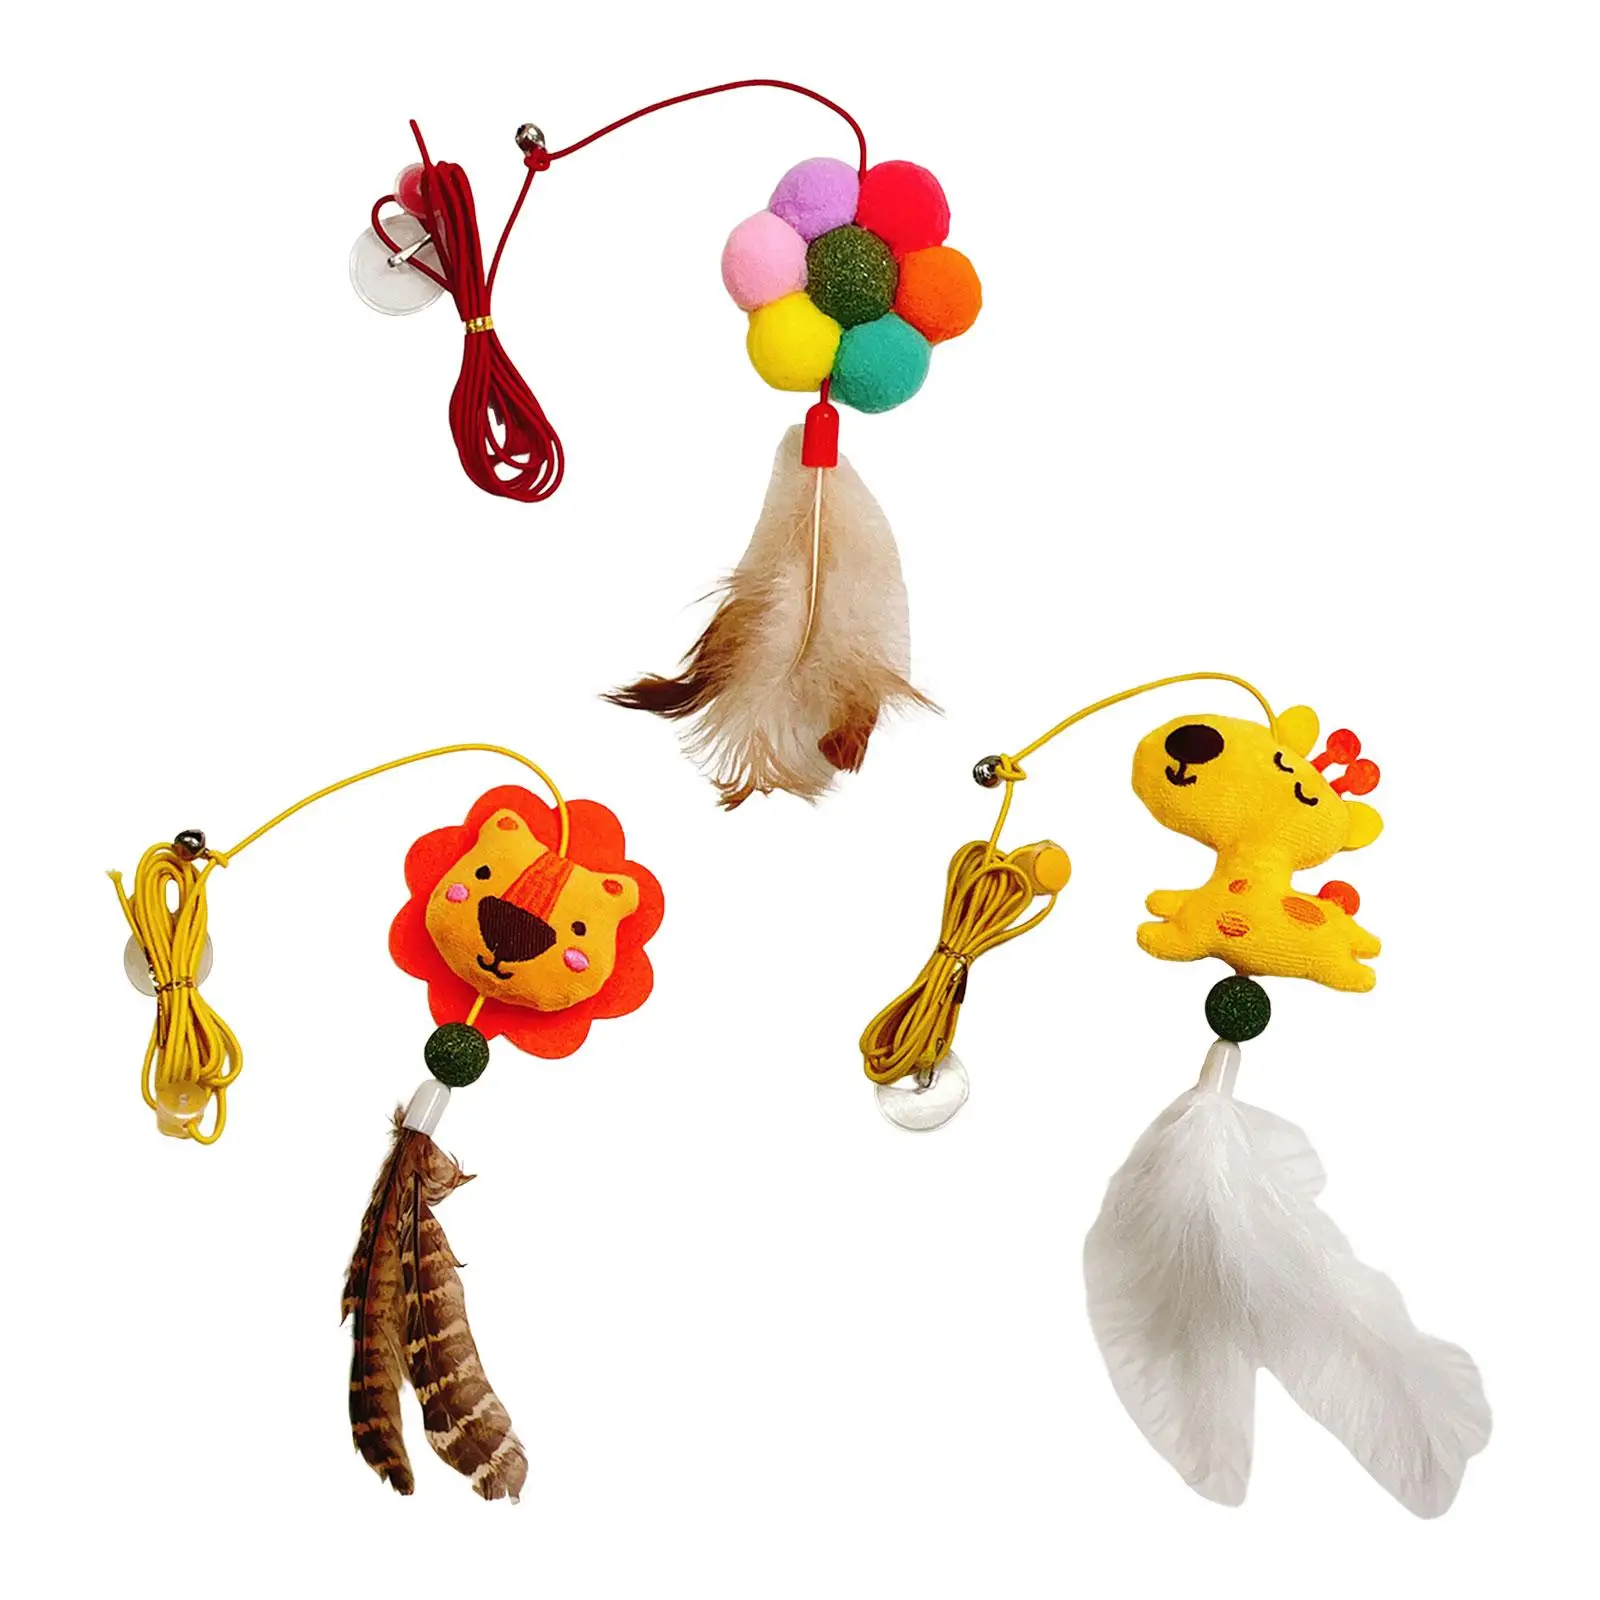 Hanging Door Interactive Cat Toy Cat Teaser Toy Hanging on Ceiling Elastic with Catnip for Indoor Cats Kitten Playing Exercising